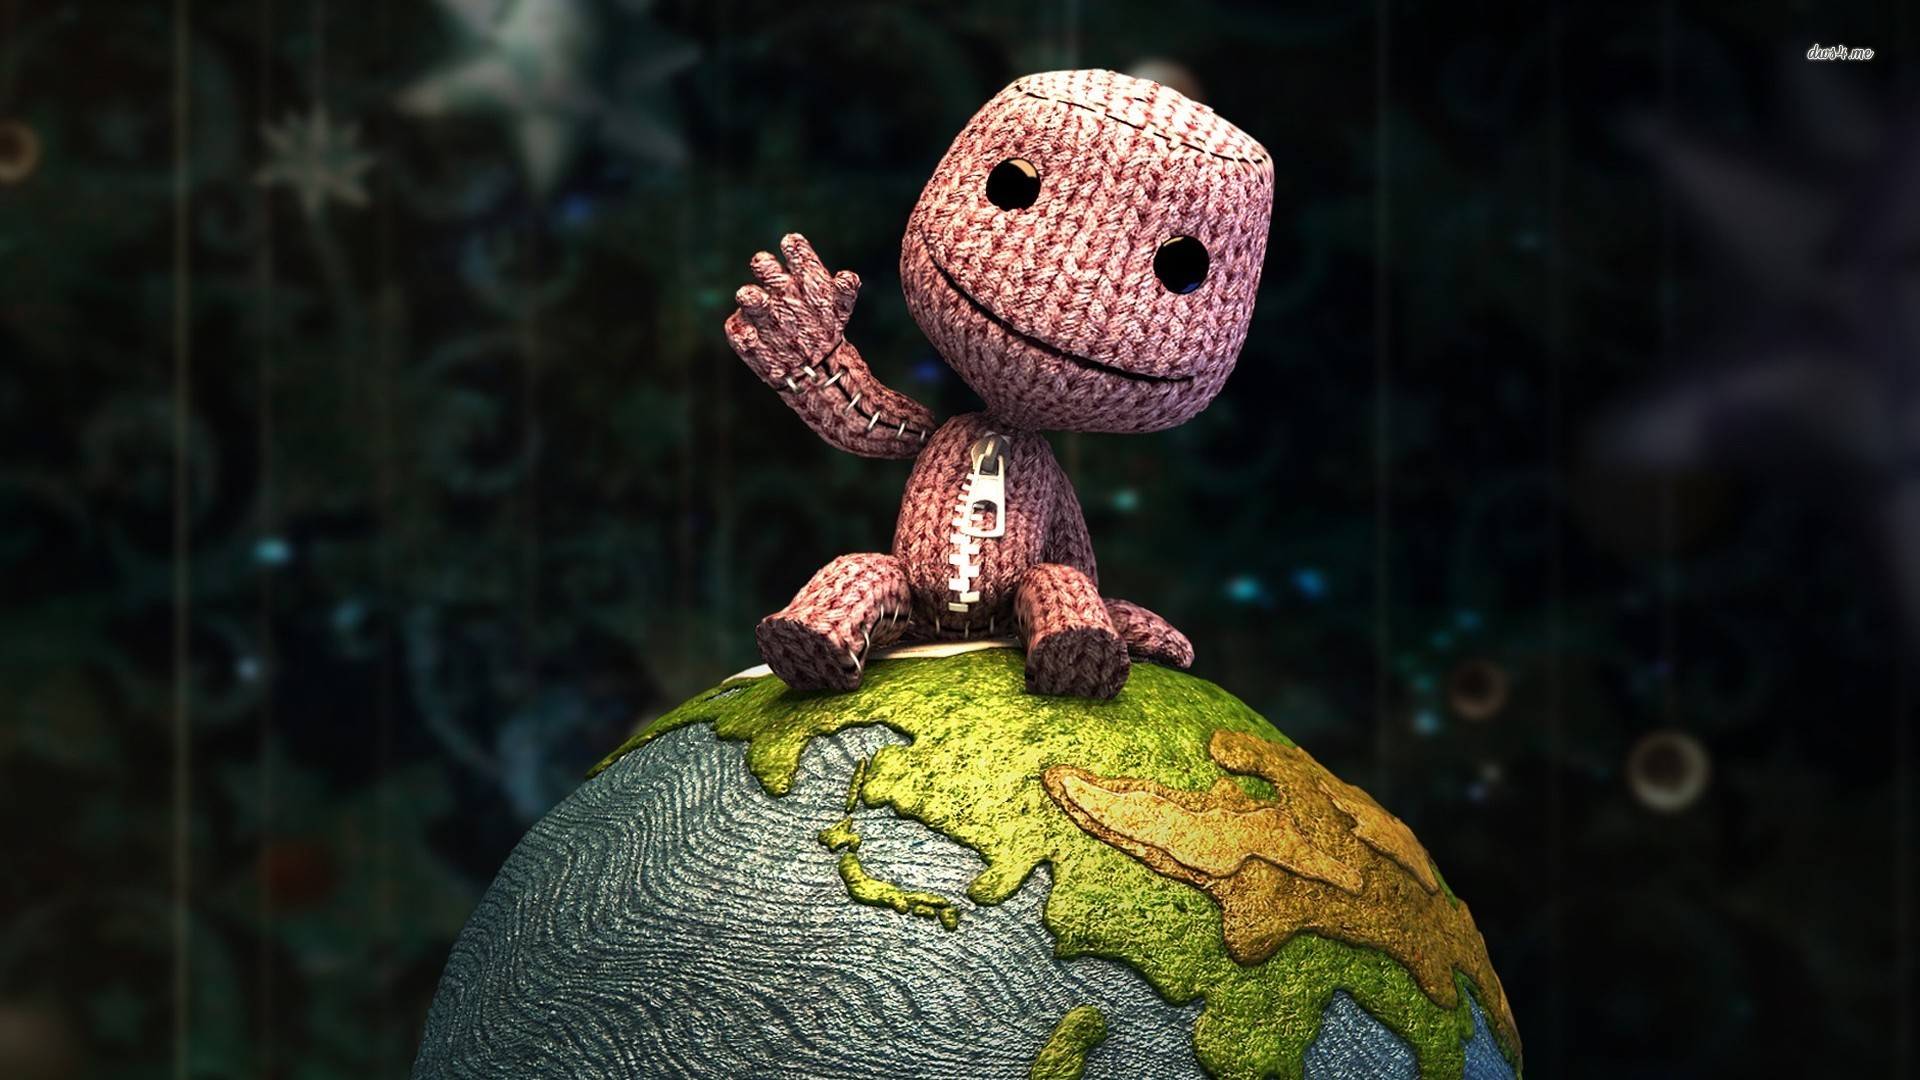 Little Big Planet #286958 | Full HD Widescreen wallpapers for ...